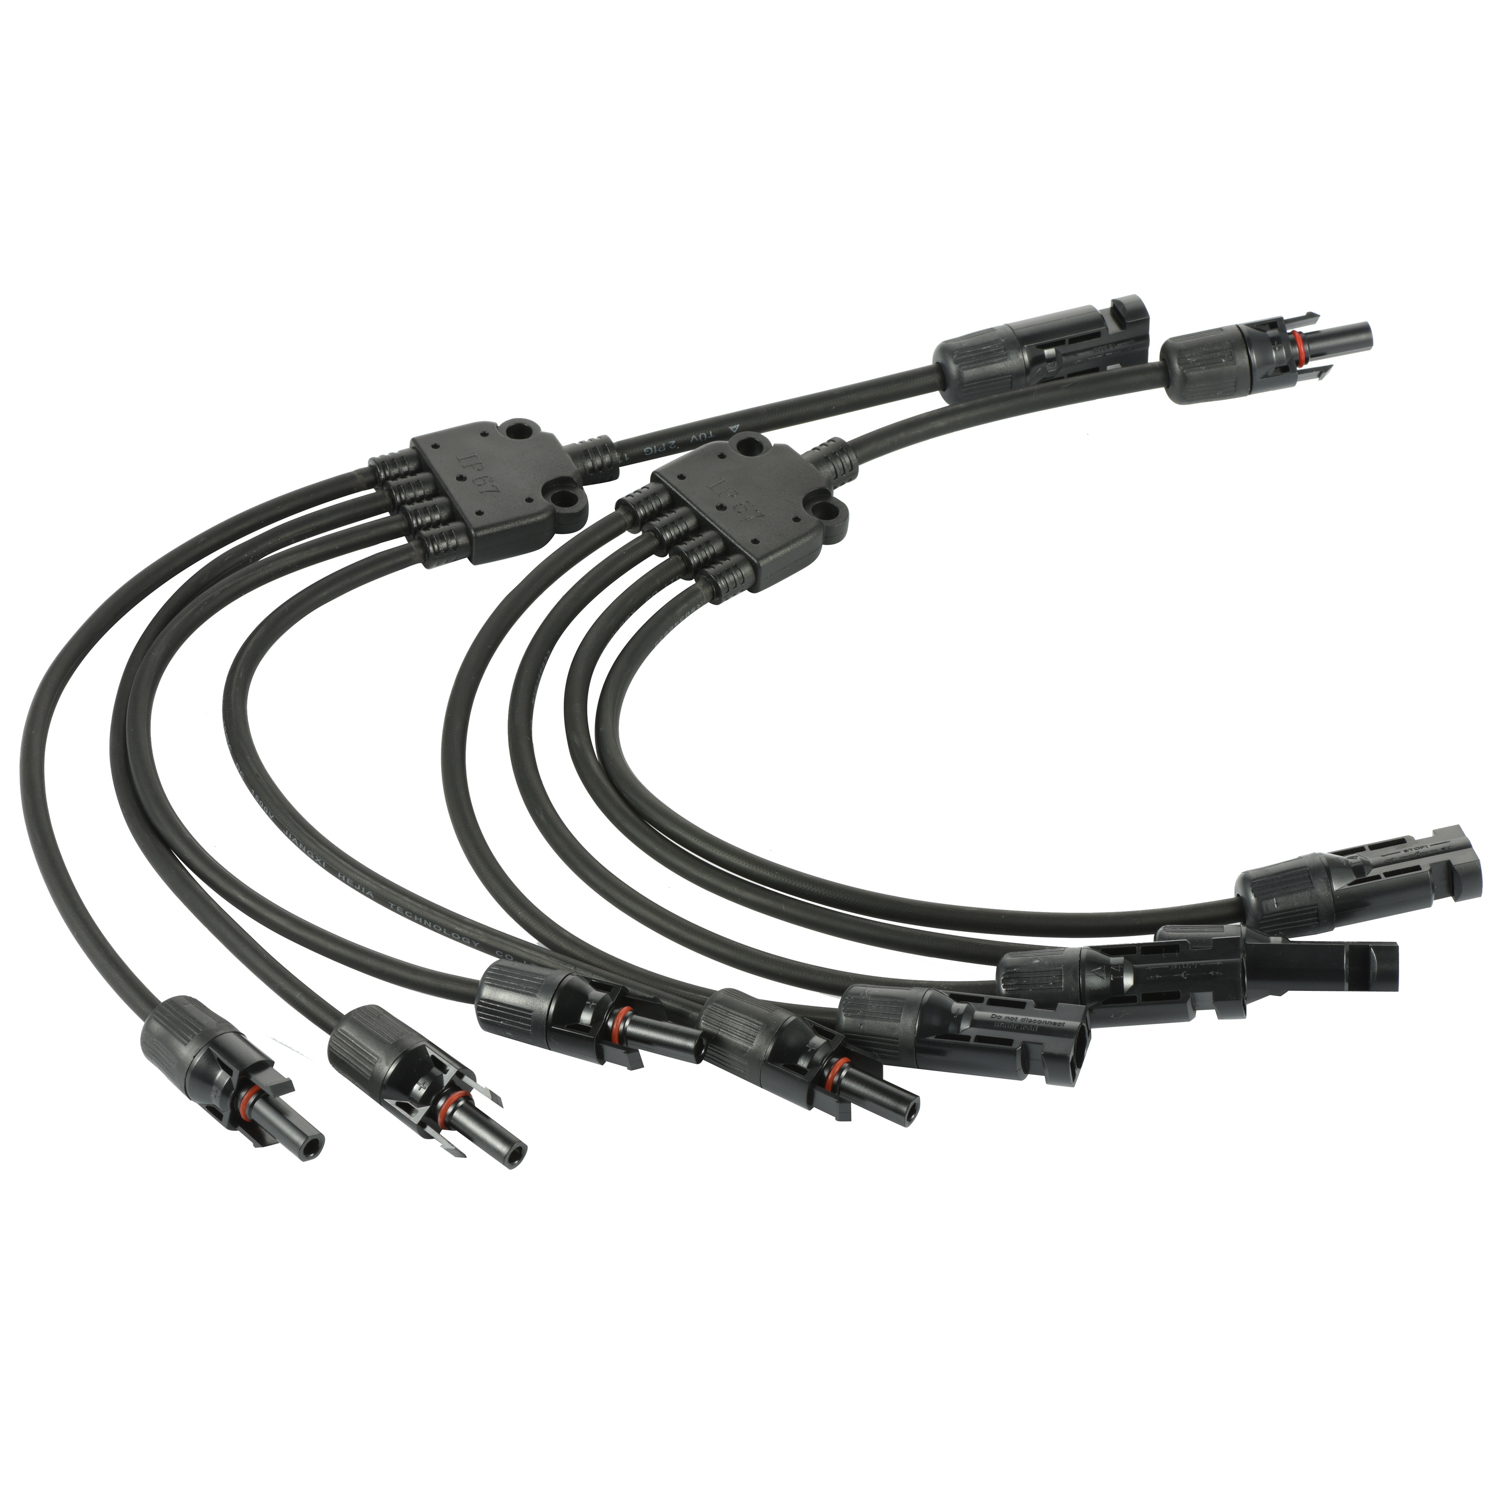 4-Way 4in1 MC4Y Coupler Splitter Connector Solar PV DC Lead Cable extension Wire harness TUV UL Approved 